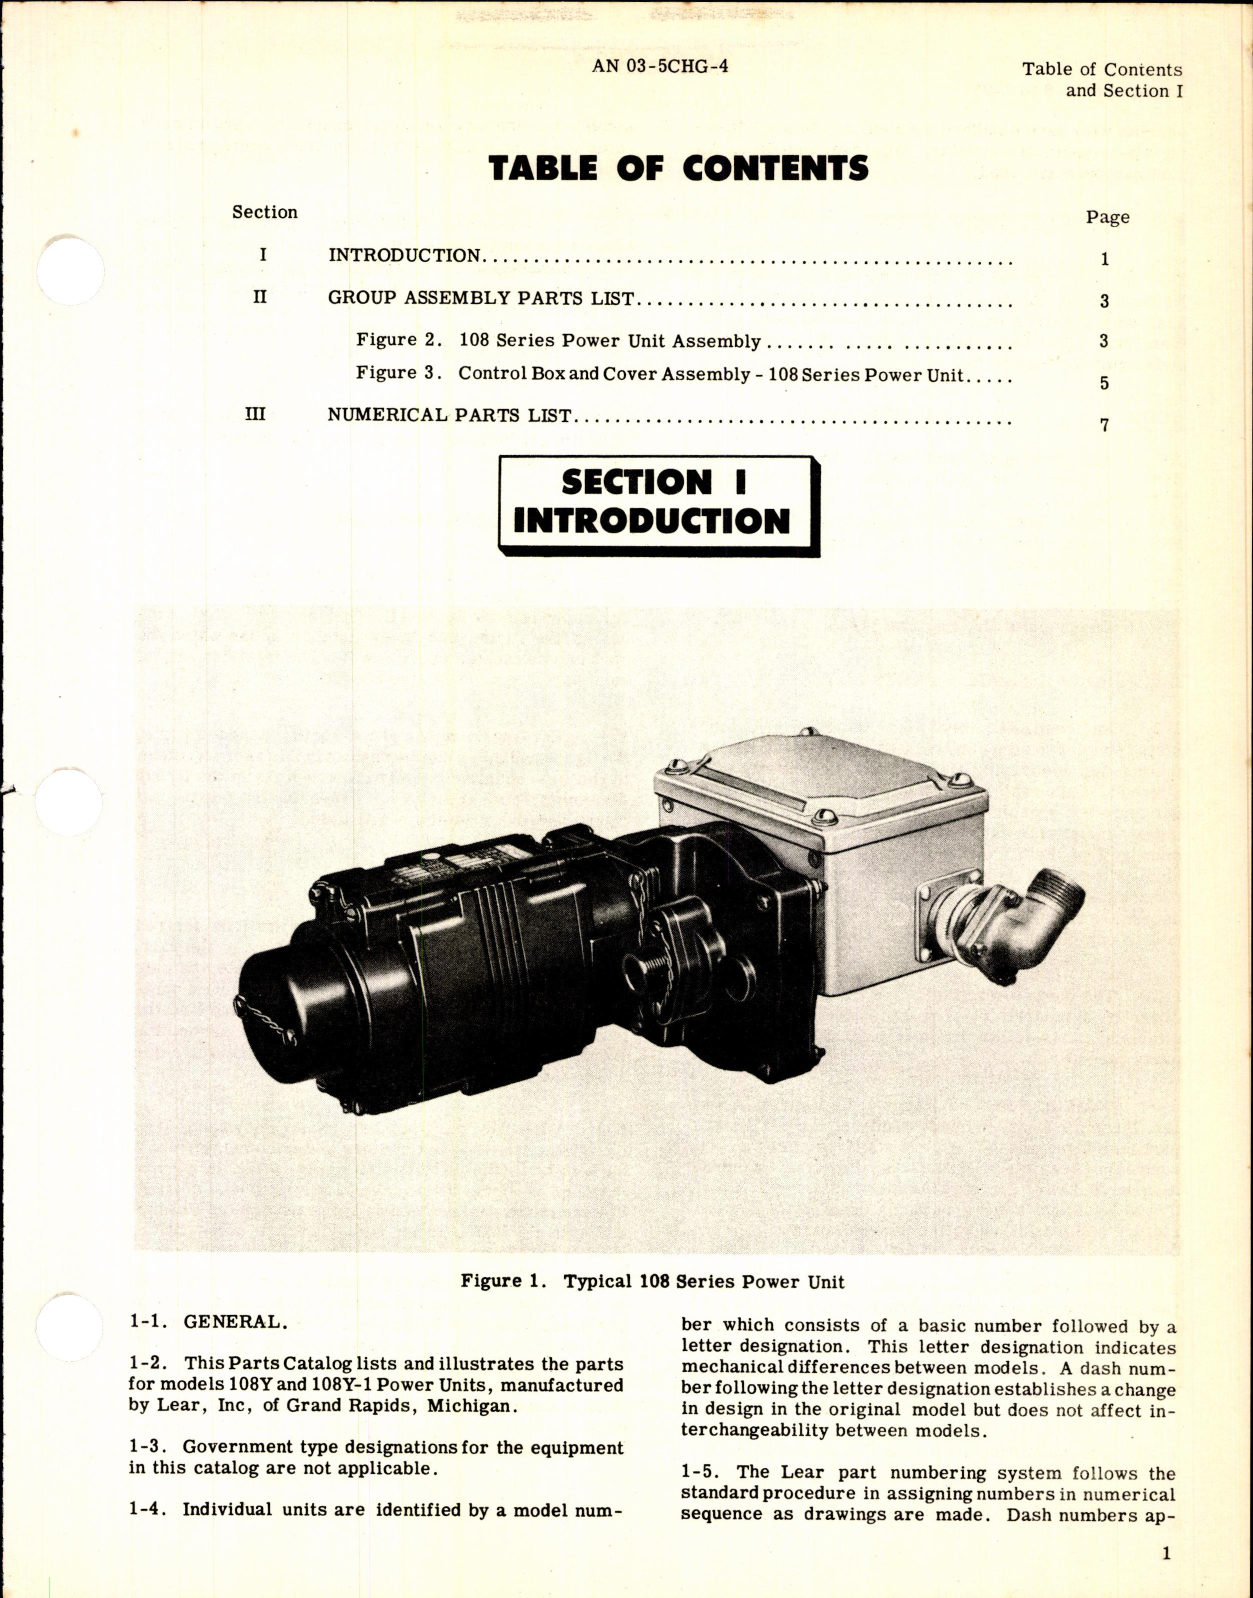 Sample page 3 from AirCorps Library document: Parts Catalog for Power Unit Assembly 108 Series